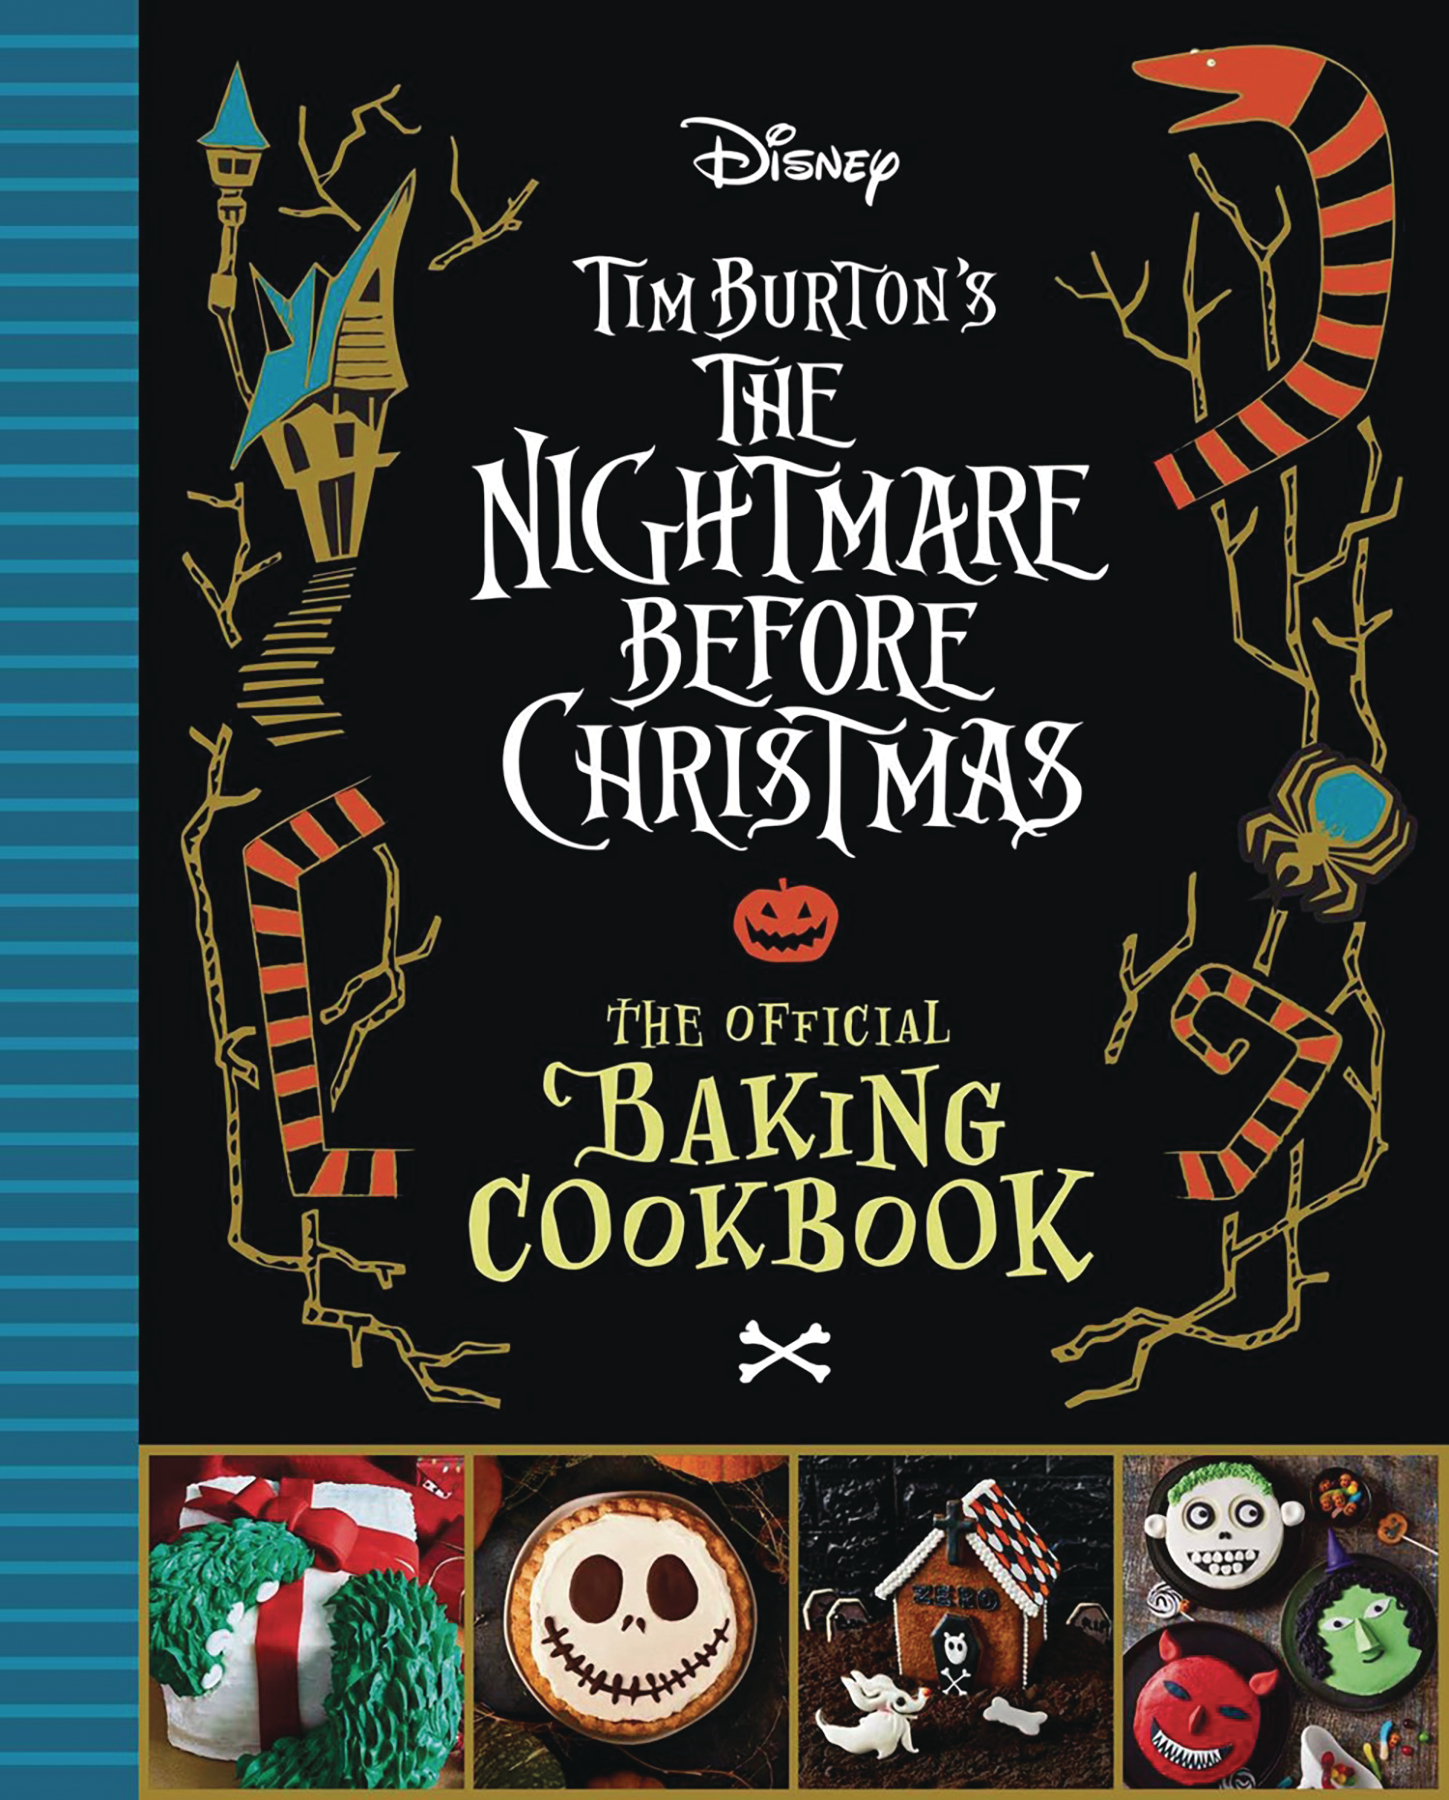 The Nightmare Before Christmas, The Official Baking Cookbook